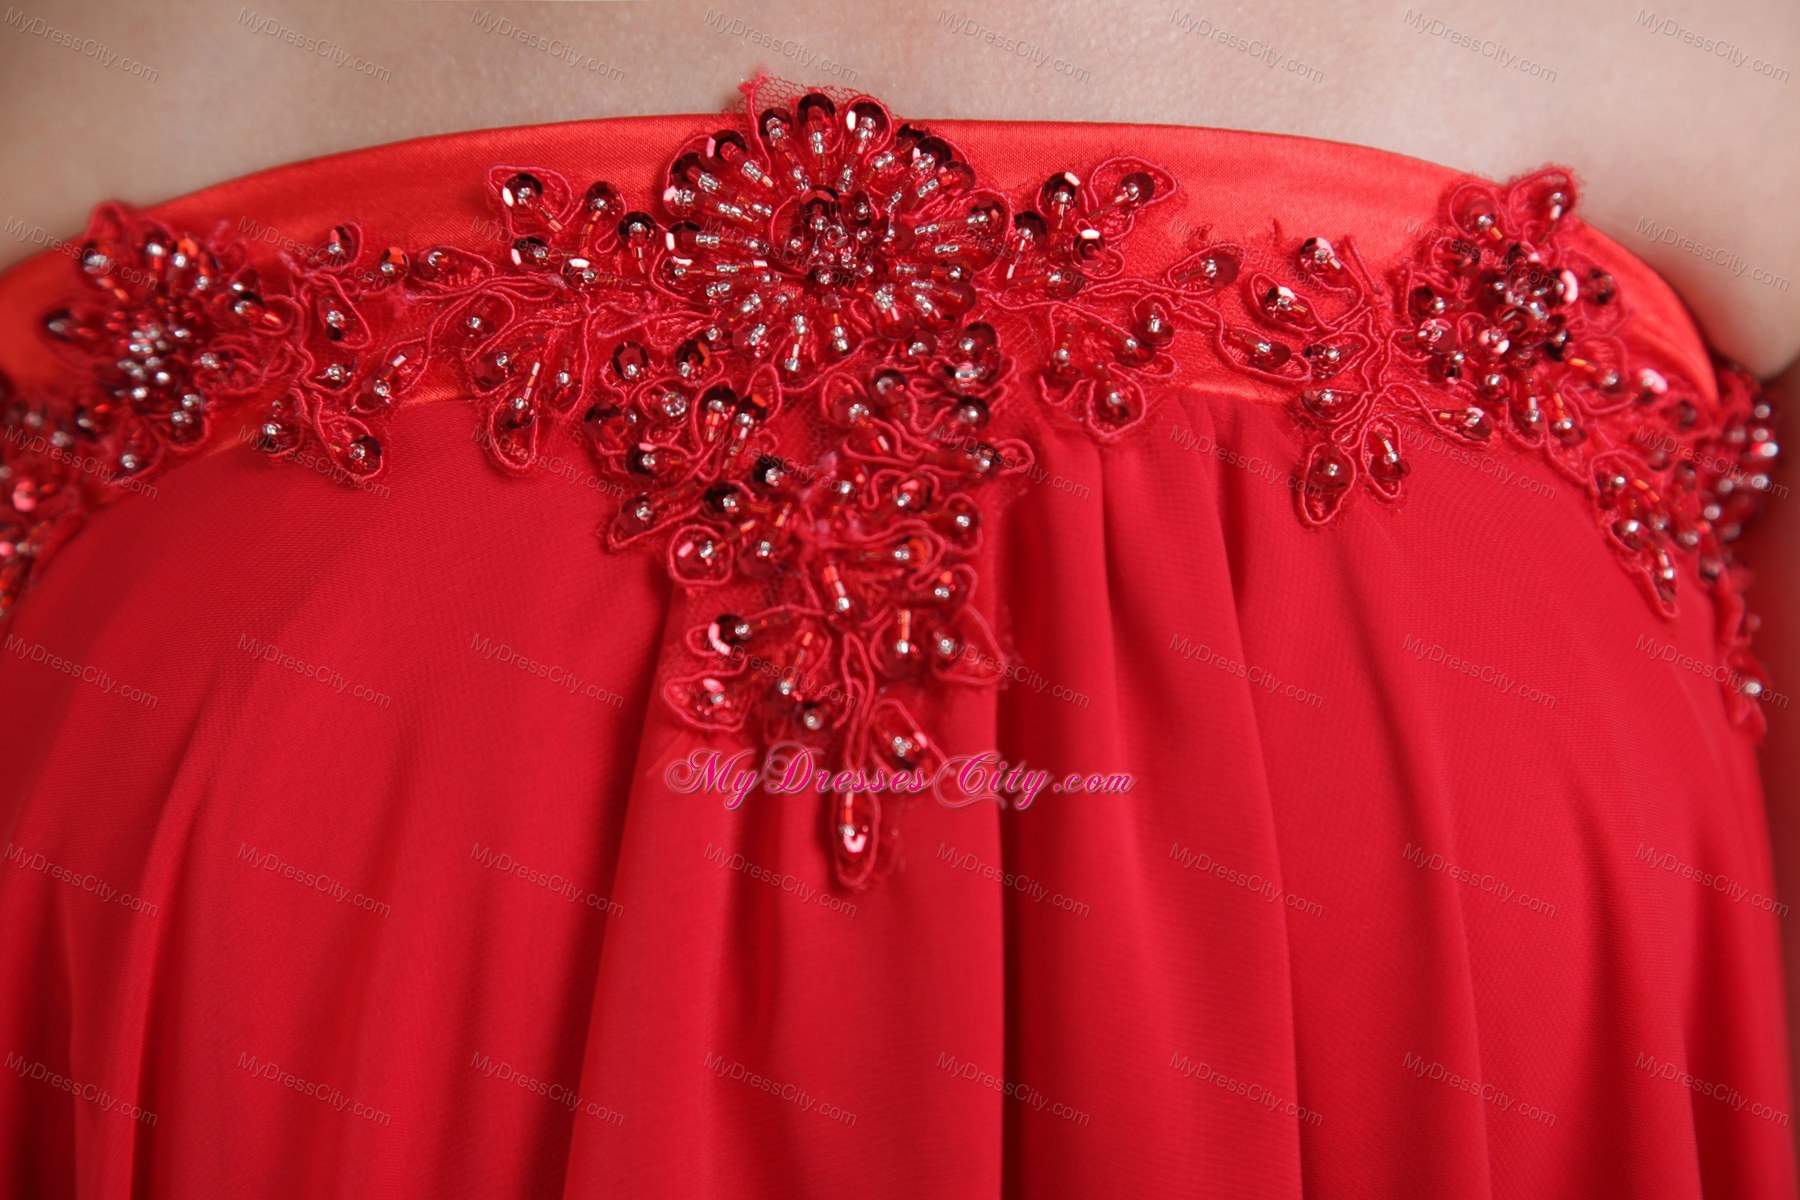 Strapless High-low Beaded Red Prom Dress with Cool Back